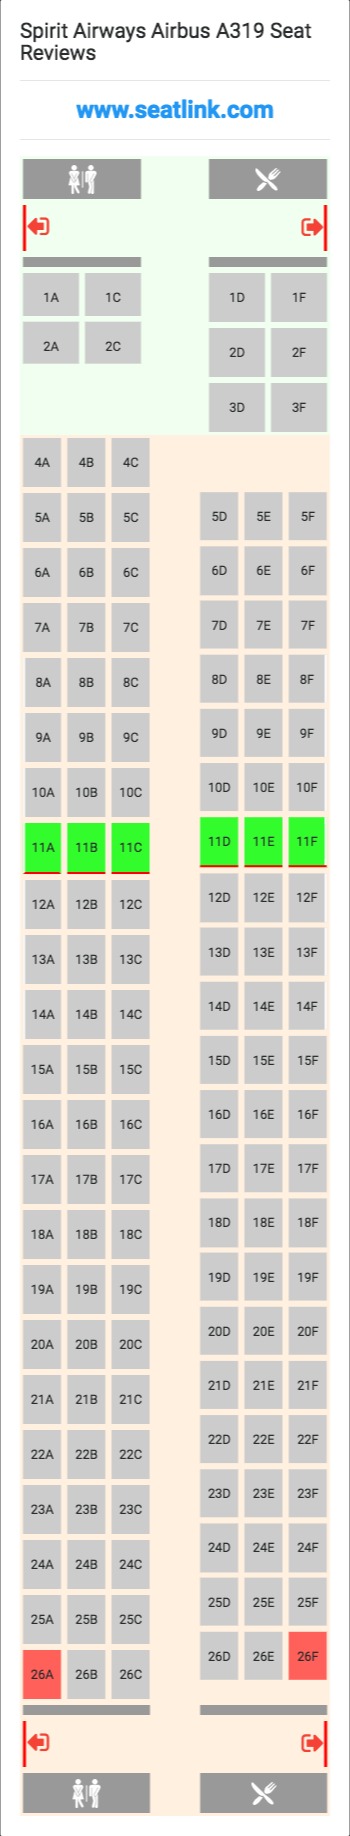 Airbus A319 Twin Jet Seating Chart